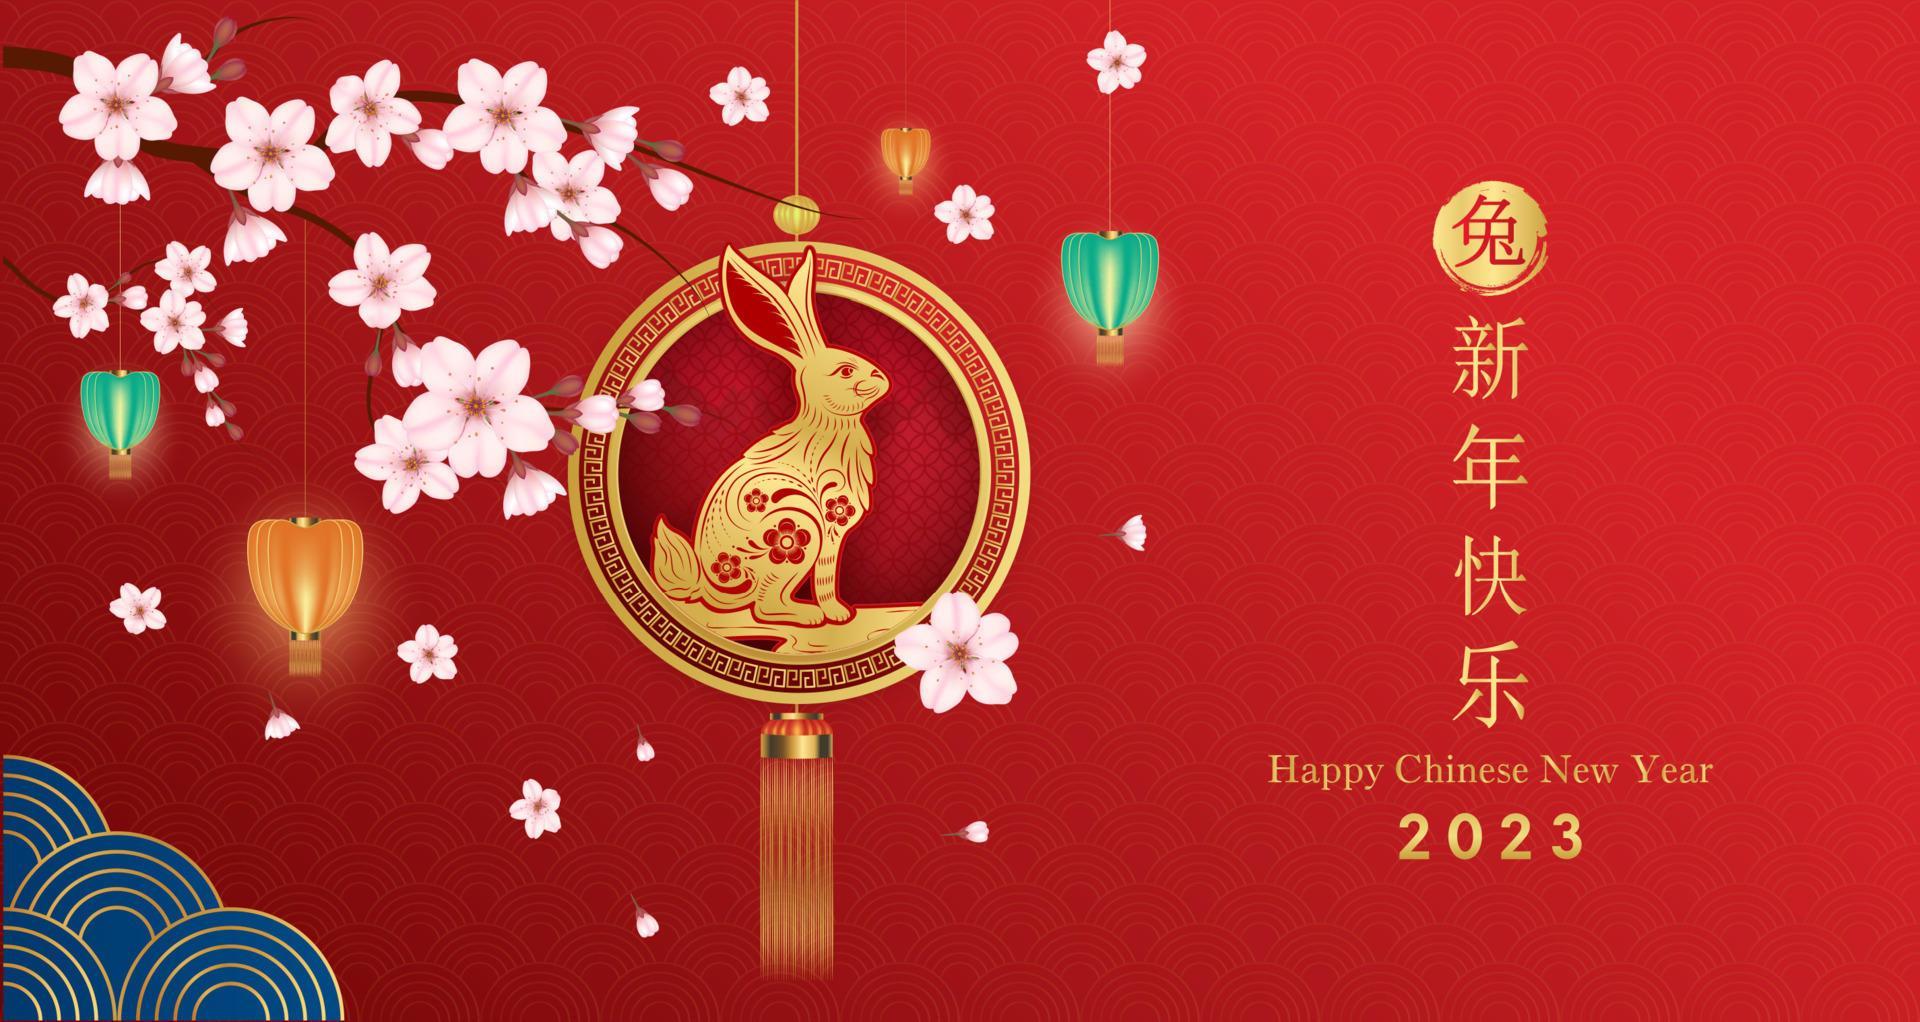 Card happy Chinese New Year 2023, Rabbit zodiac sign on red background